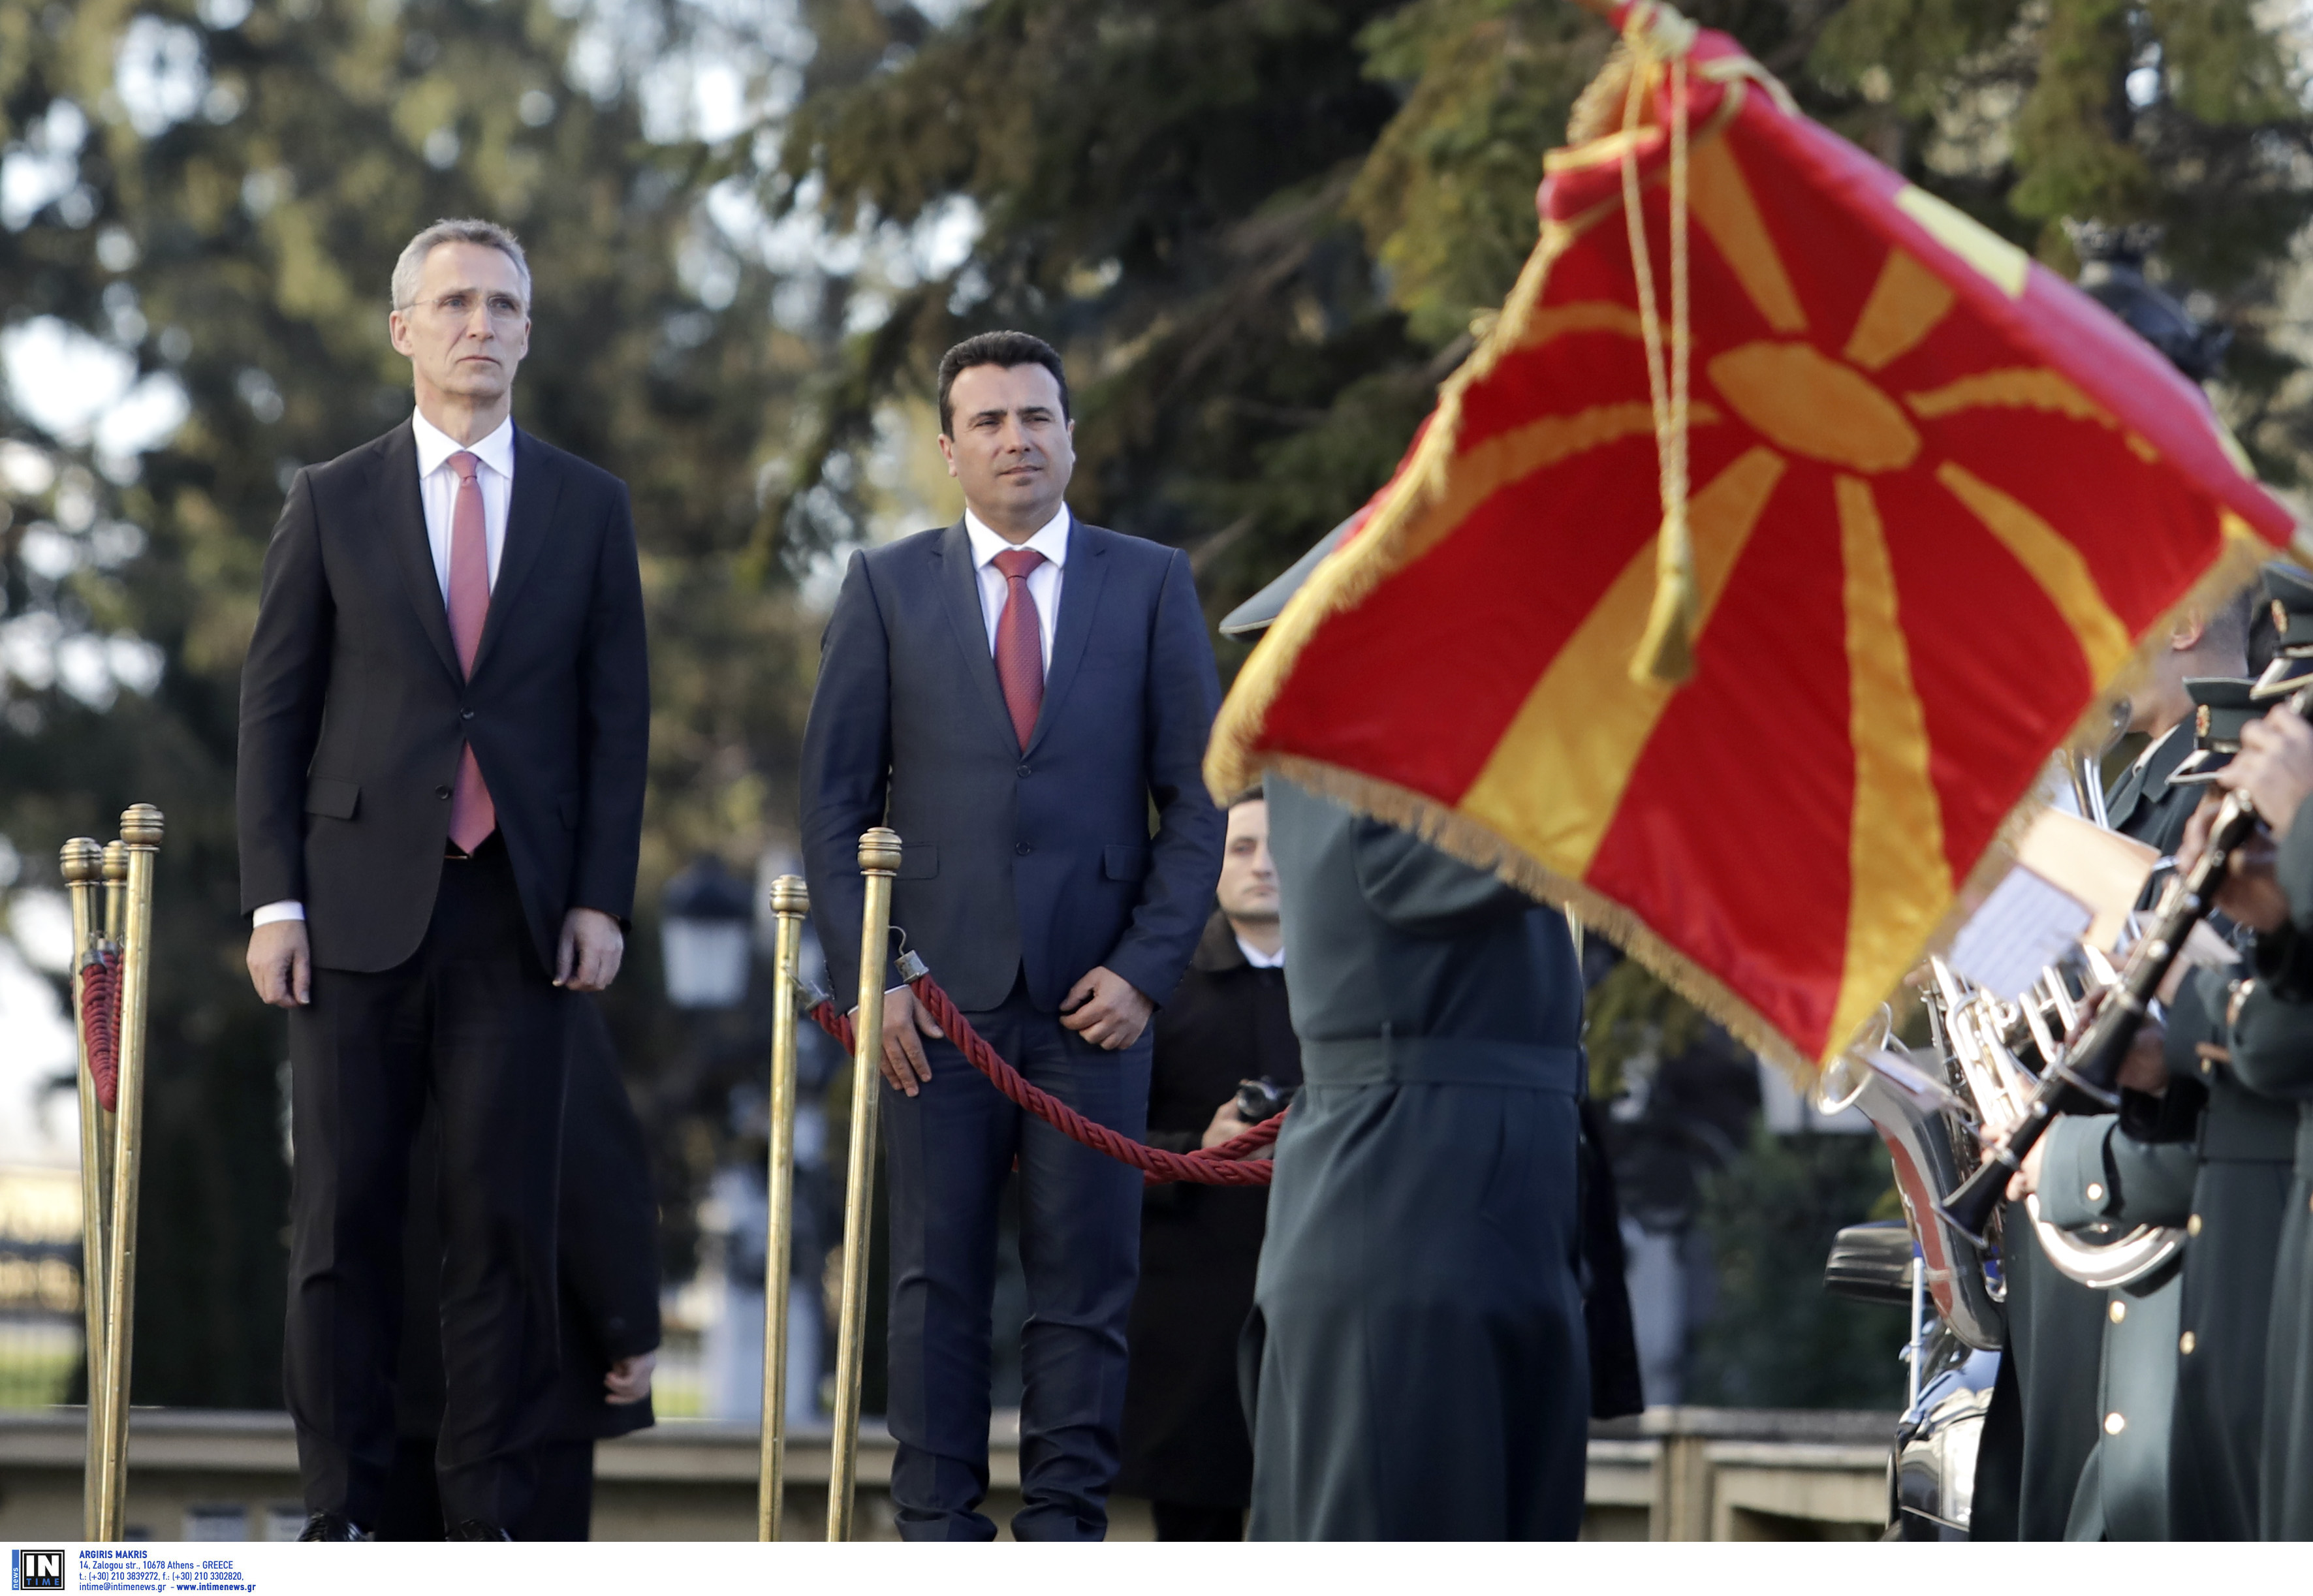 Euro-Atlantic pressures for fast-track solutions with FYROM, Albania